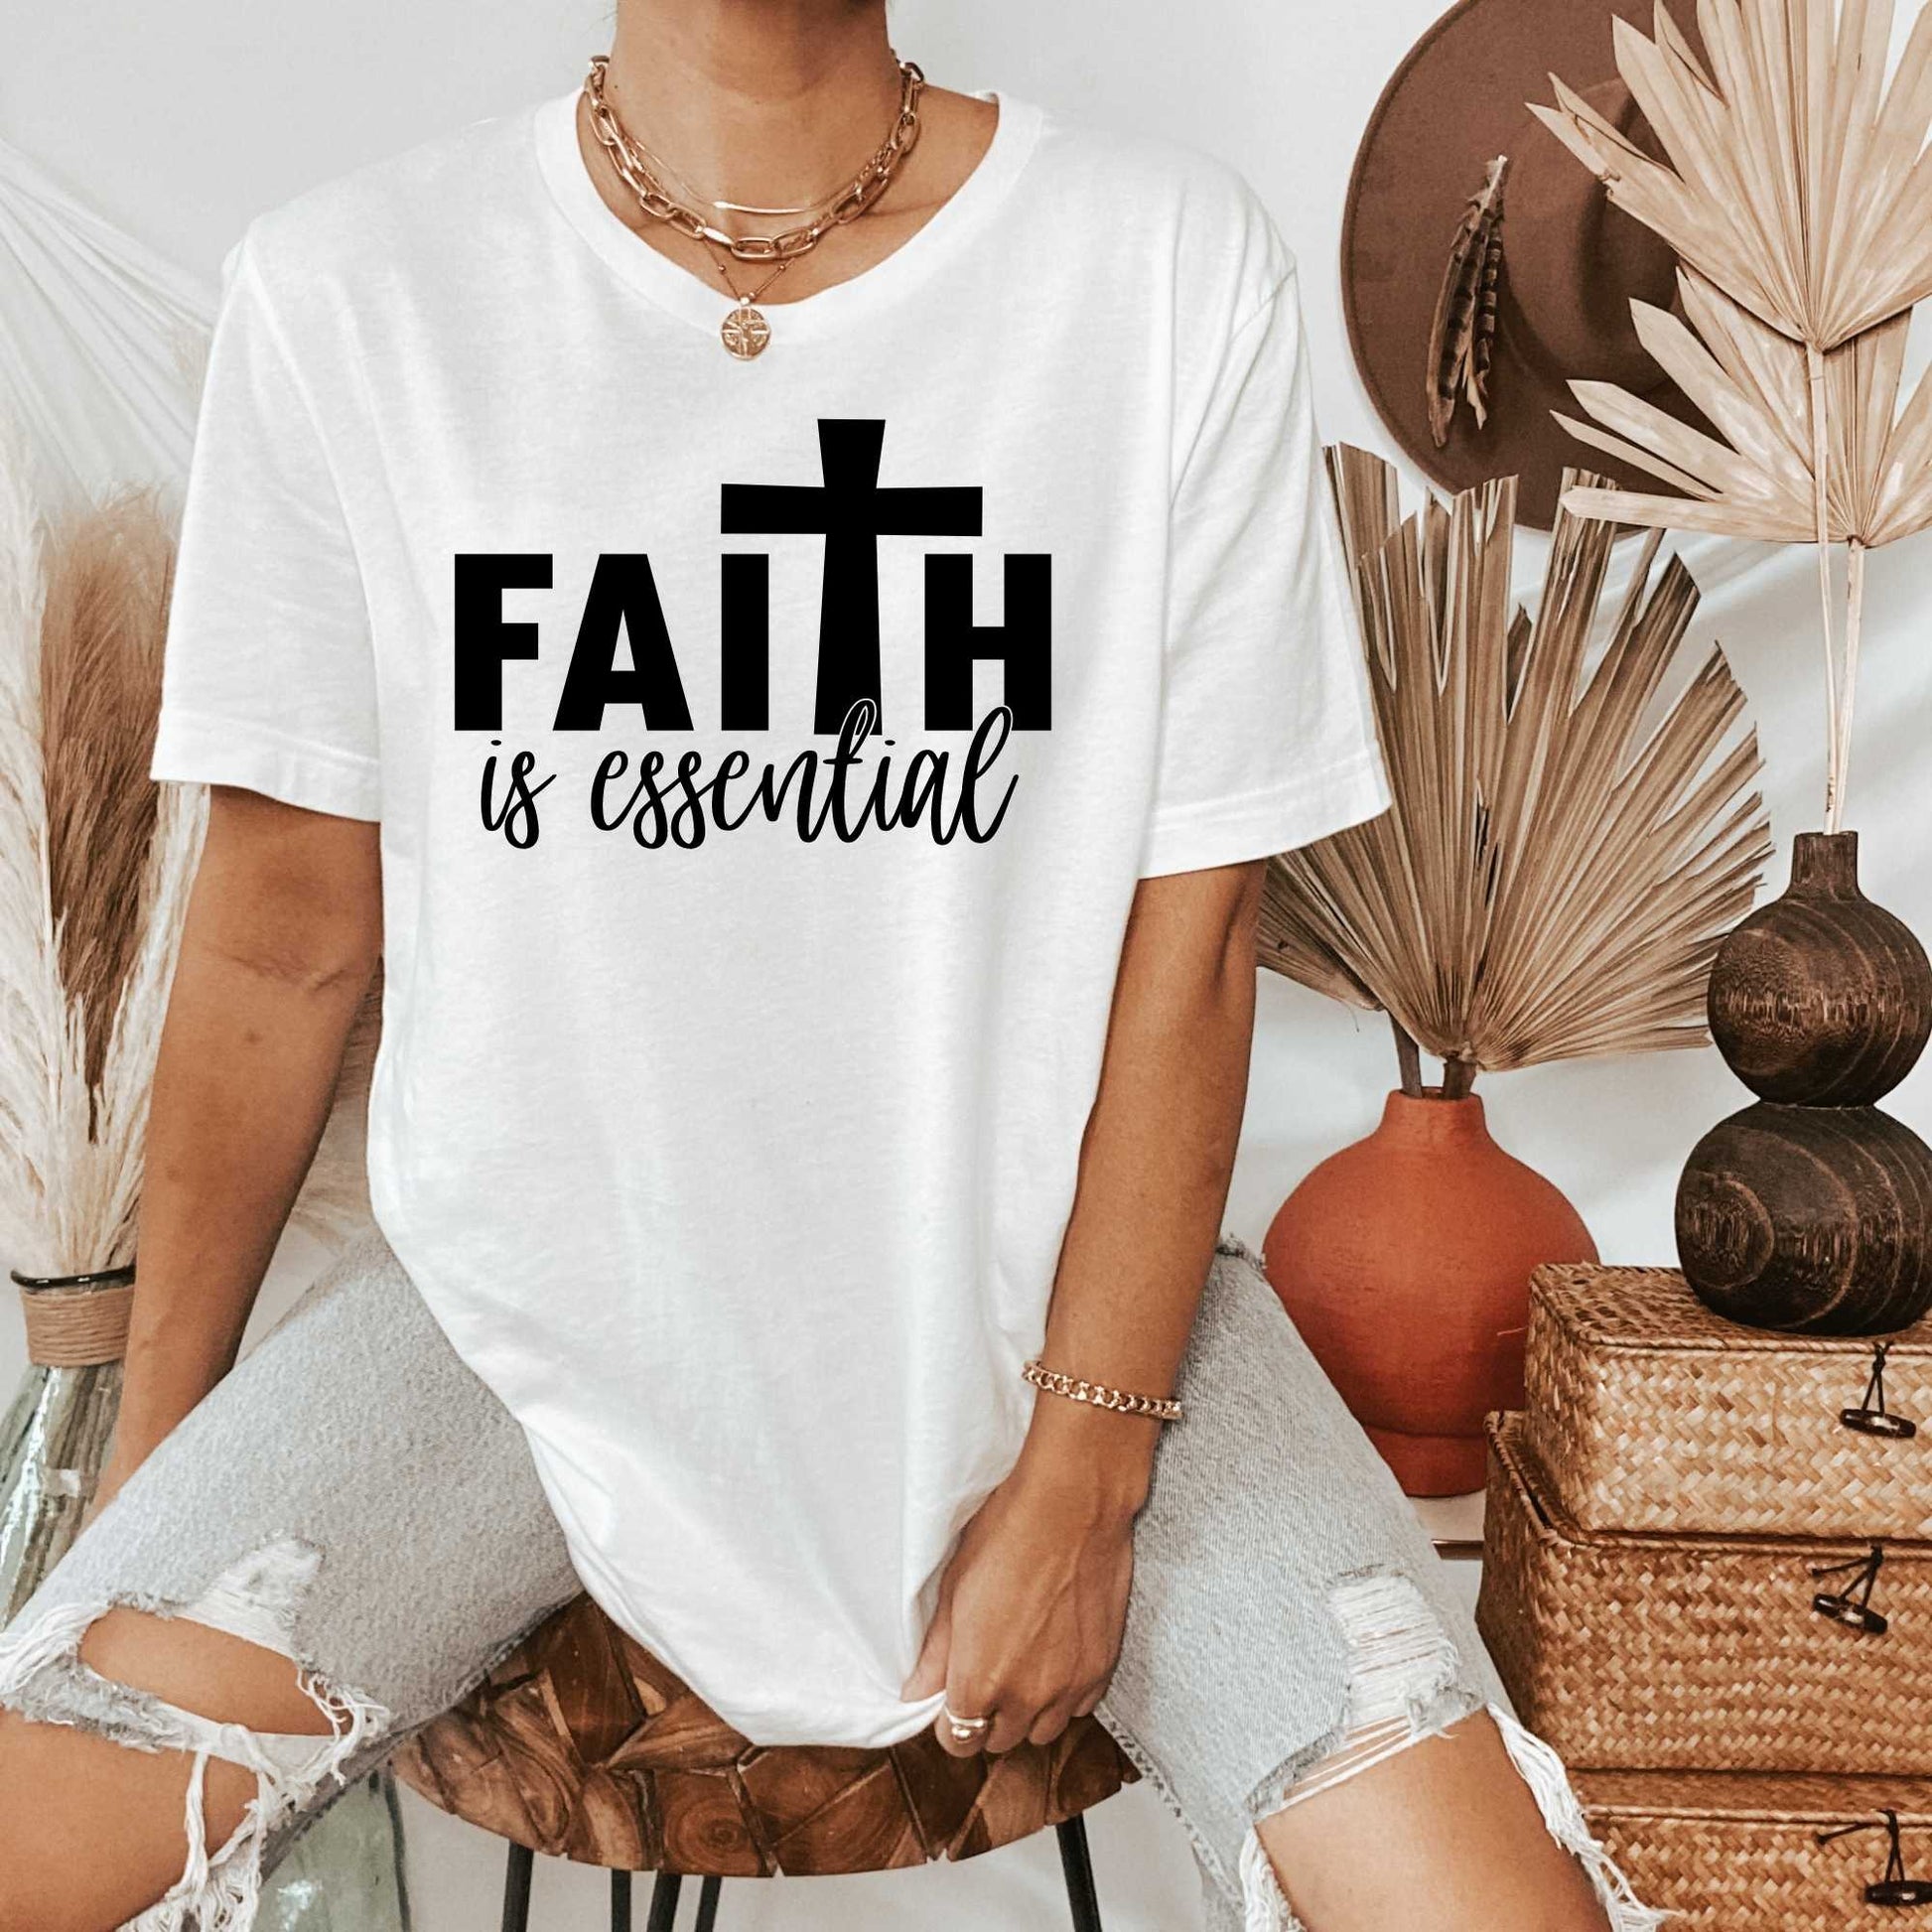 Faith is Essential Shirts about God for Women and Men